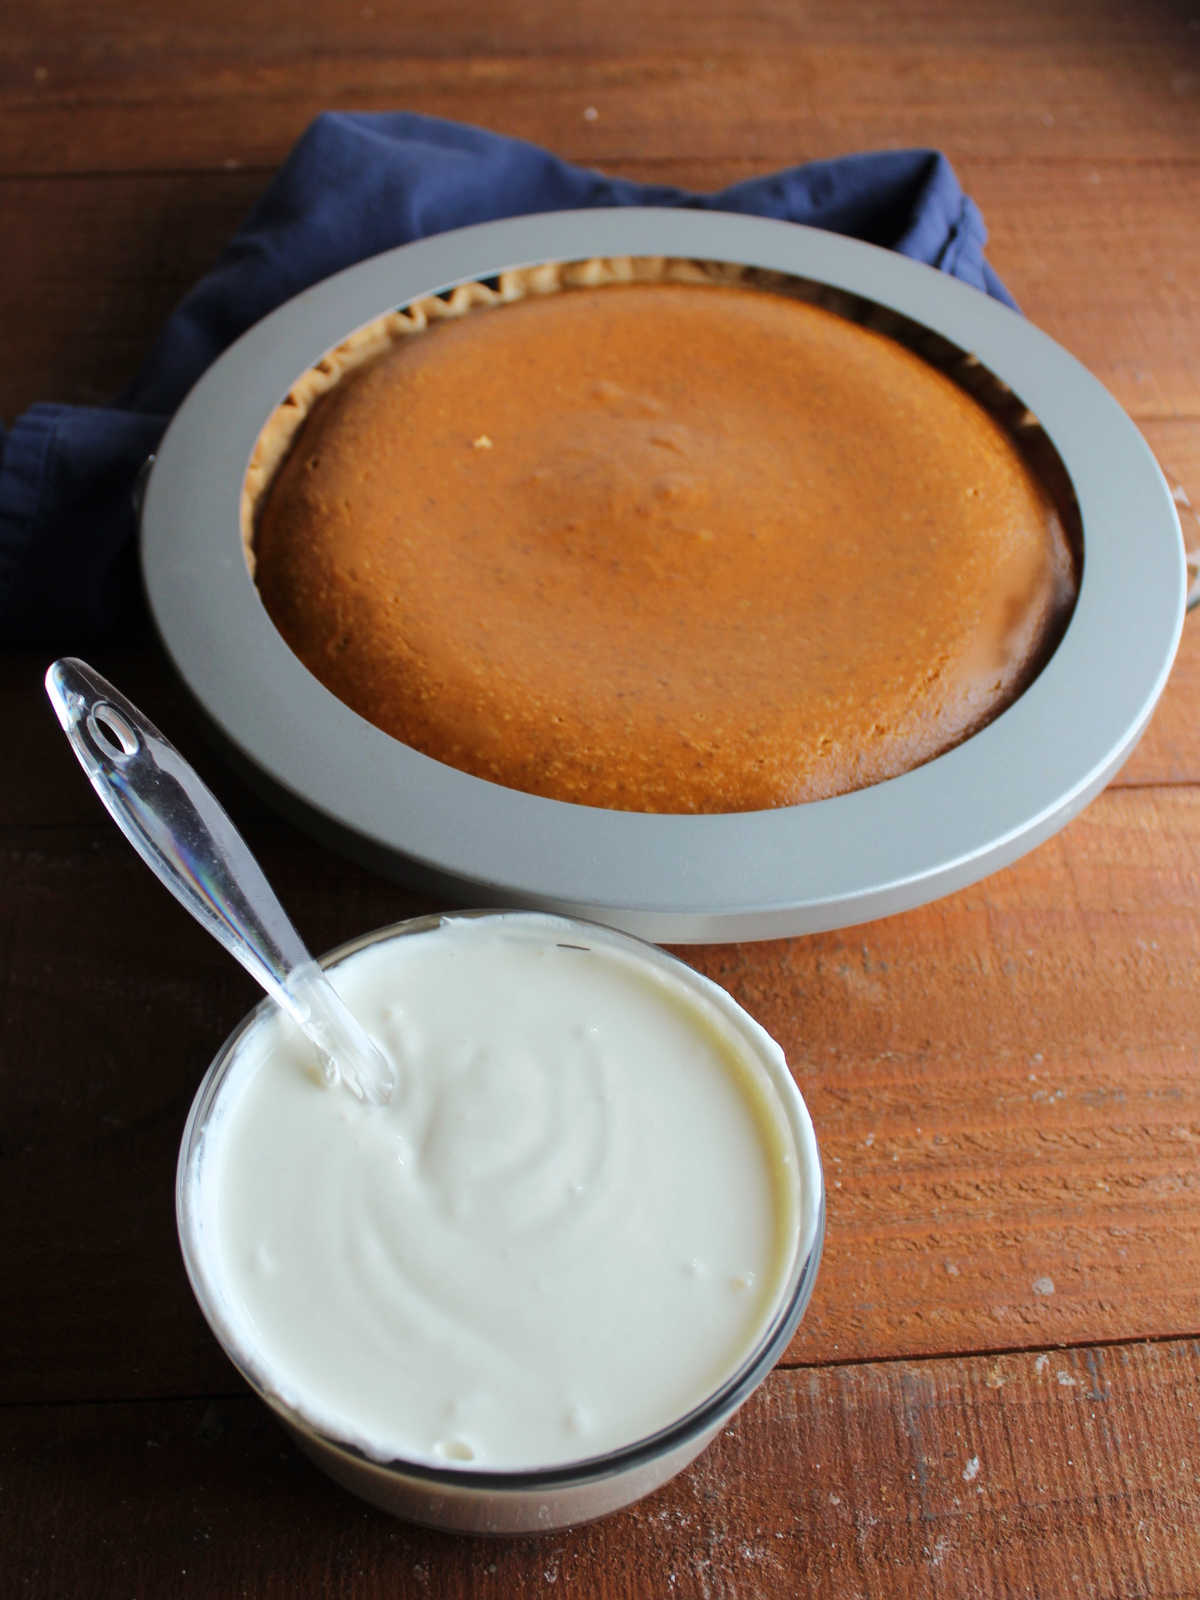 Small bowl of sour cream, sugar, and vanilla mixture in front of a mostly baked pumpkin pie.